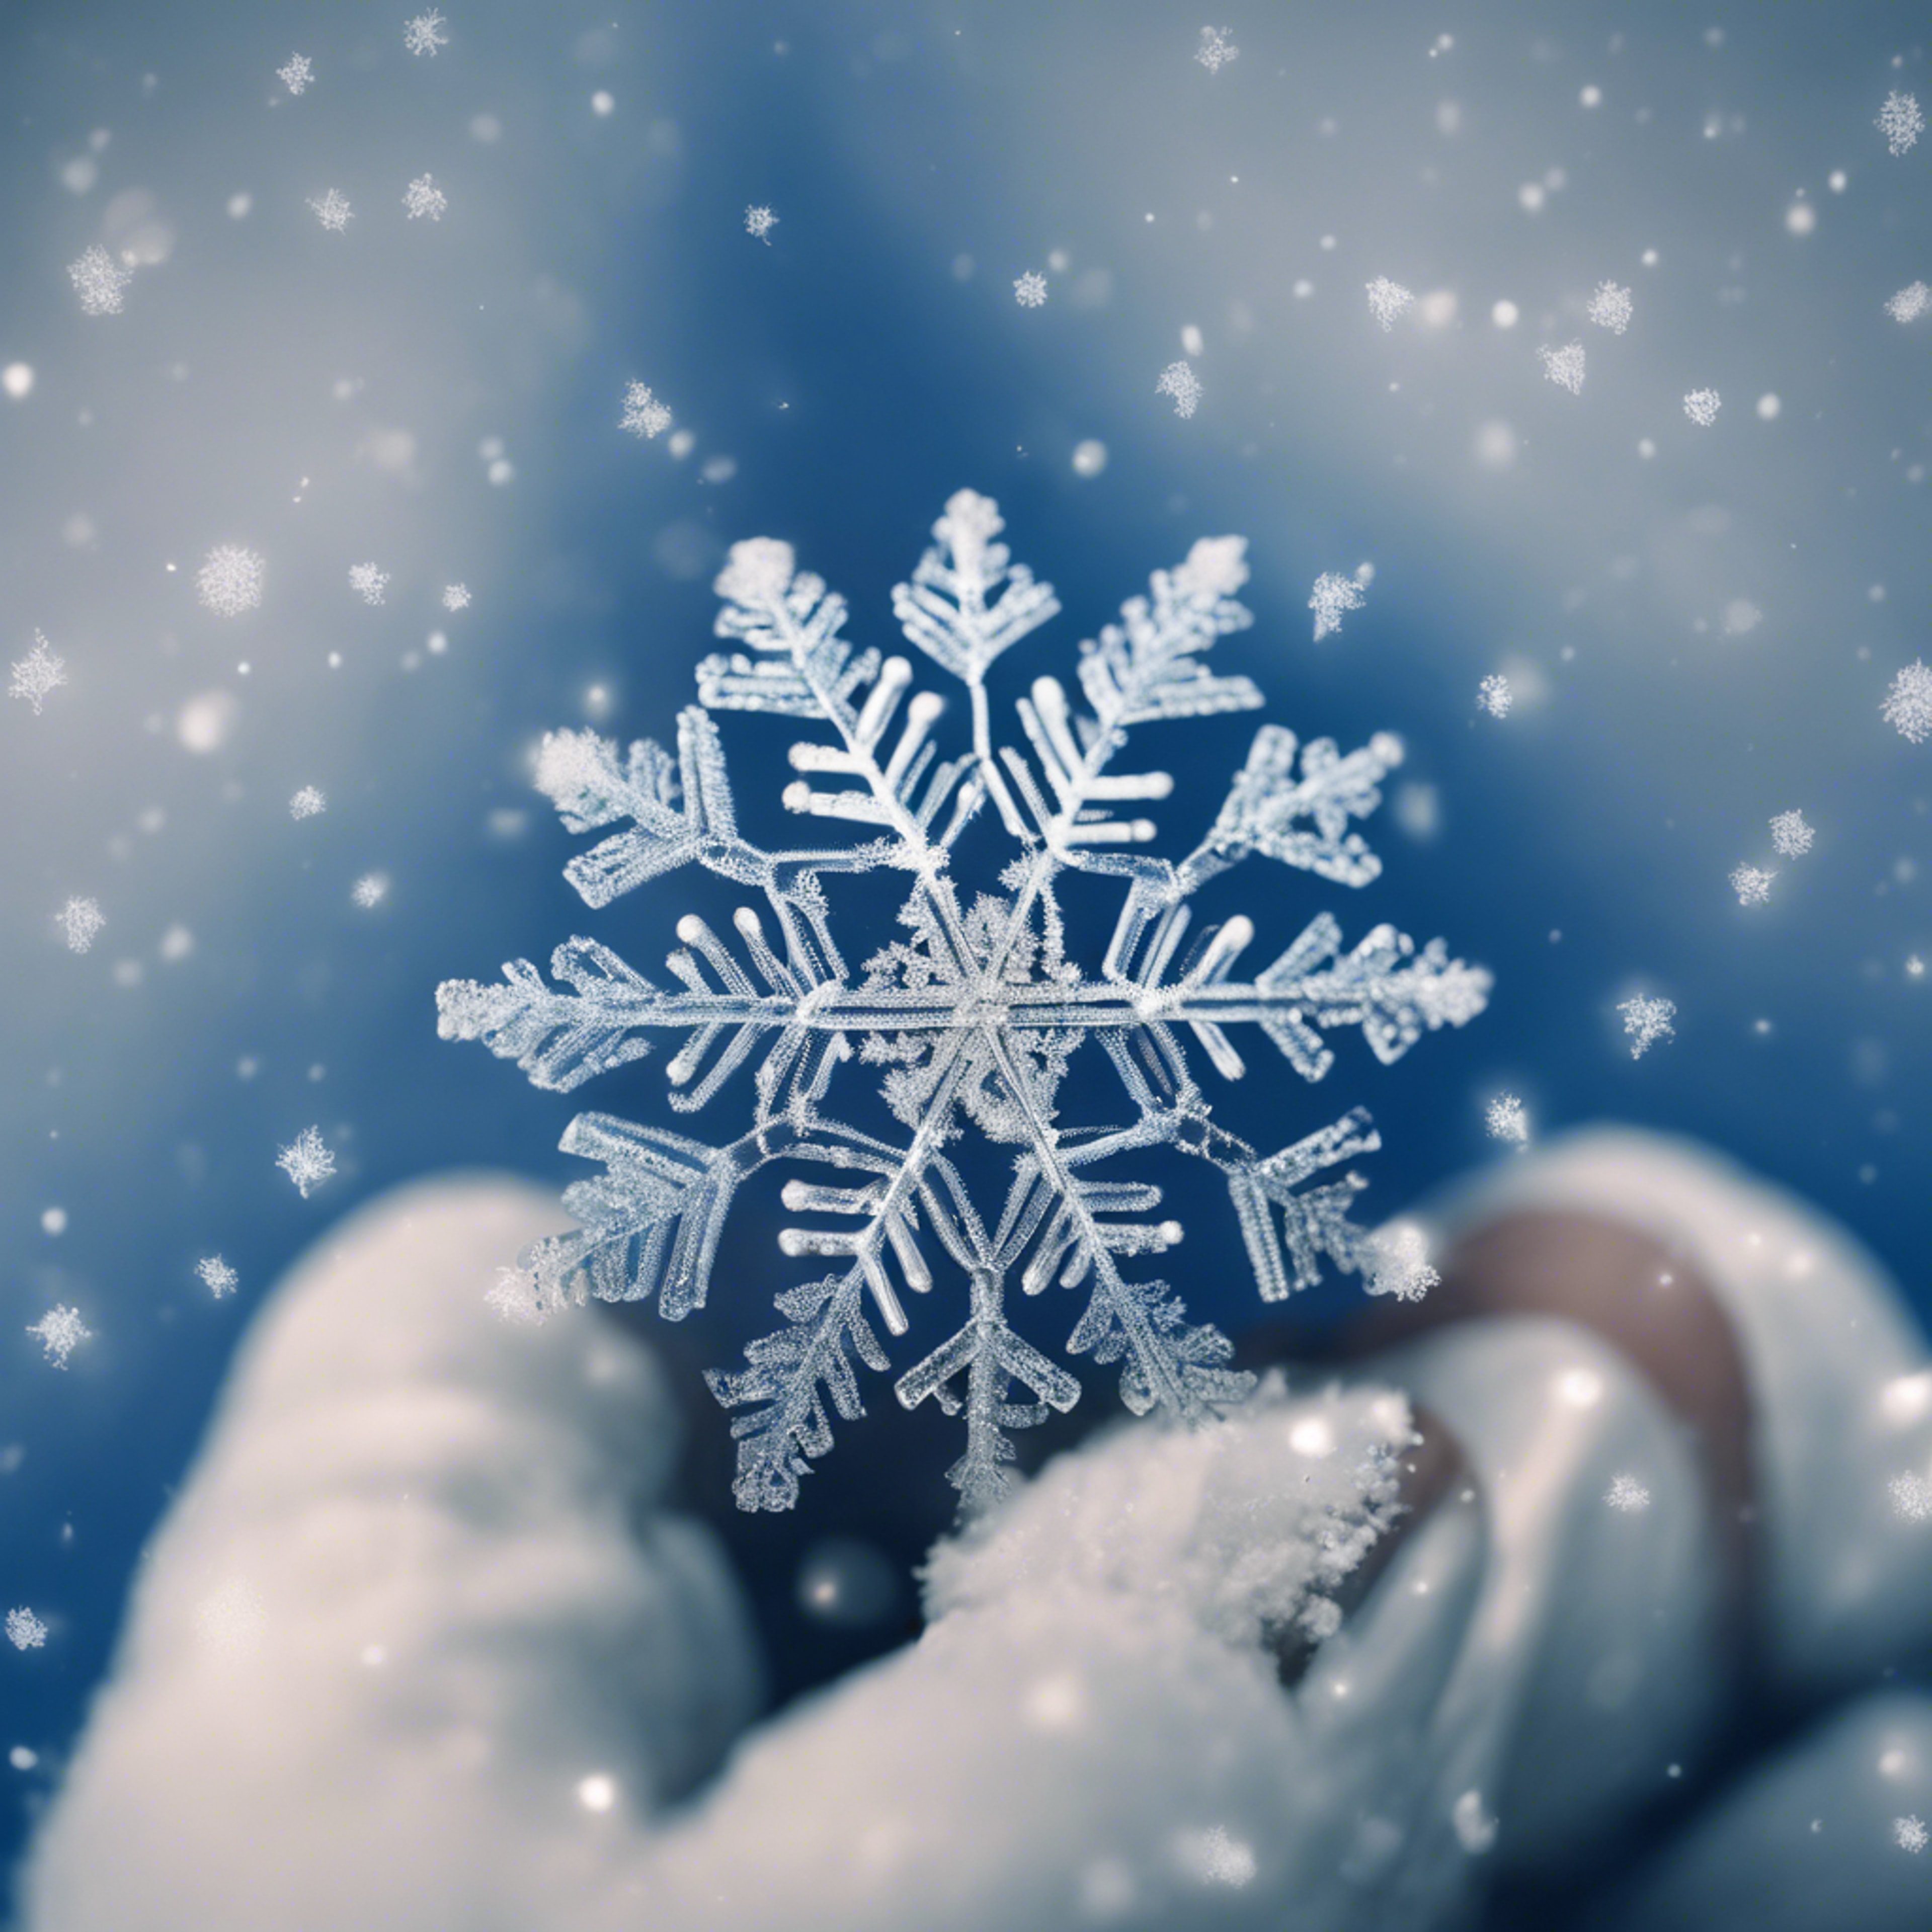 Intricate patterns of a snowflake on a blue gloved finger. 벽지[6c7ed0f3c74b413e9833]